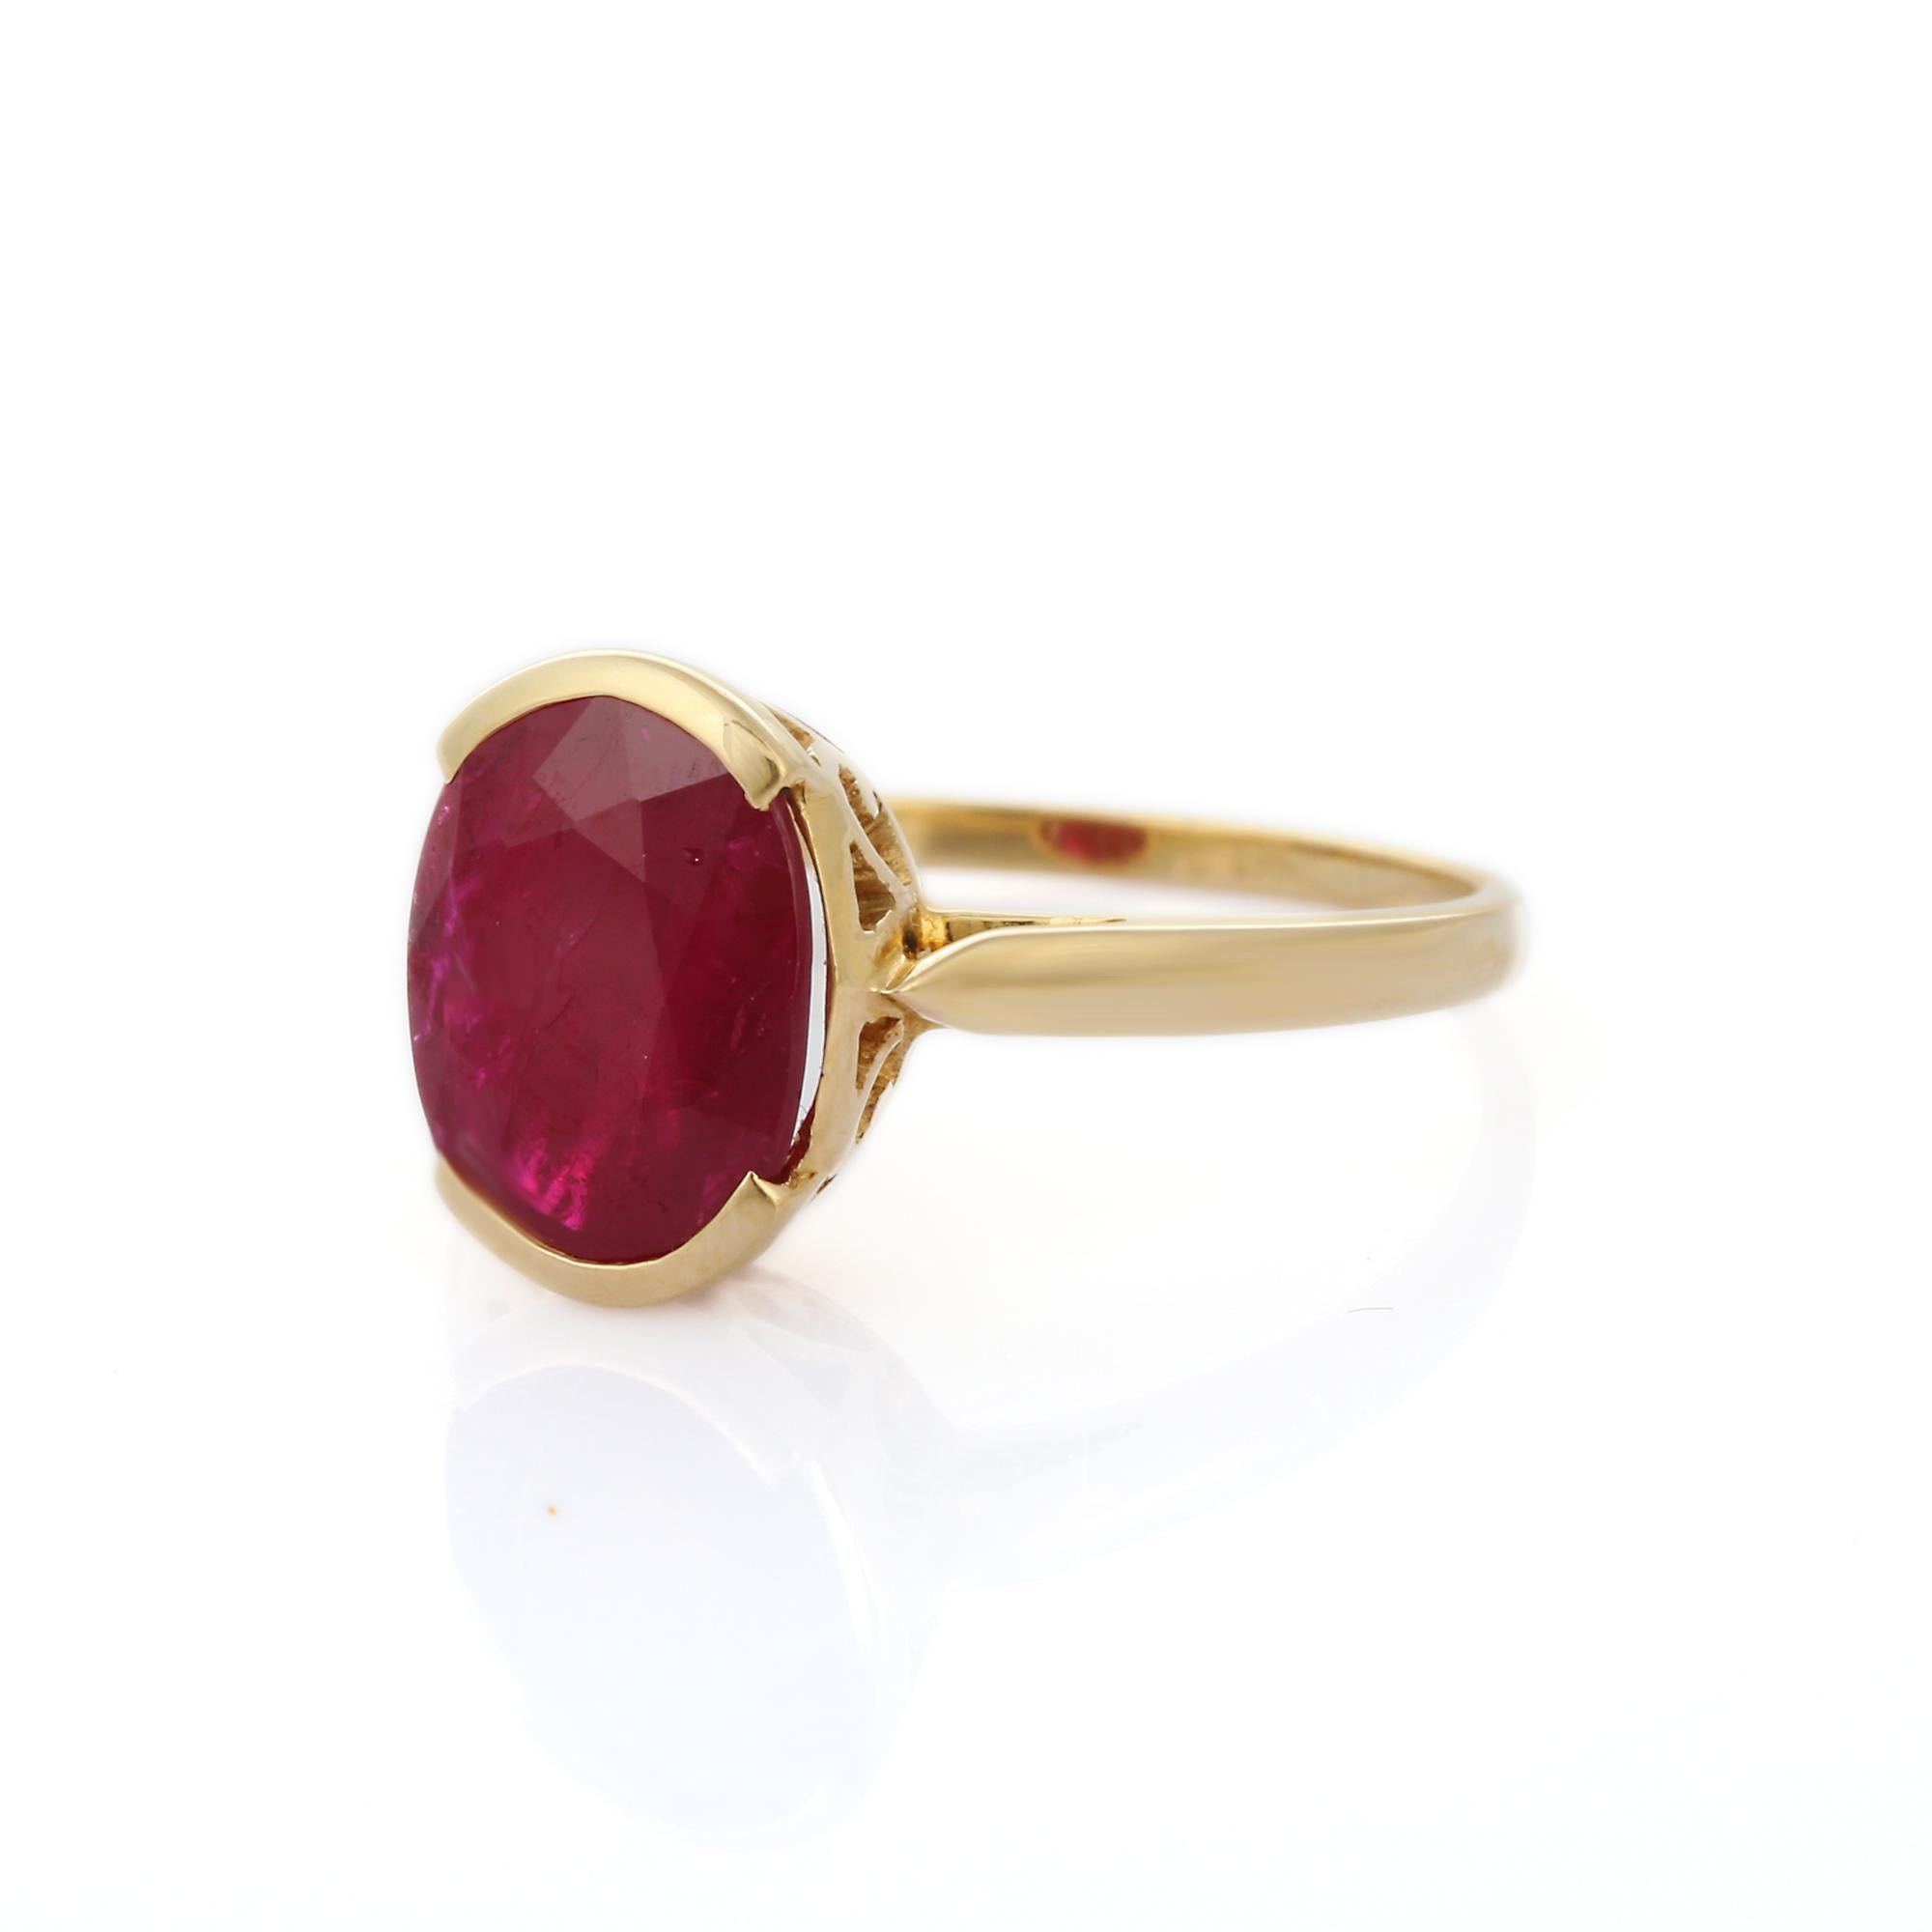 For Sale:  Contemporary Style 3.59 Carat Ruby Oval Cut Cocktail Ring in 14K Yellow Gold   5